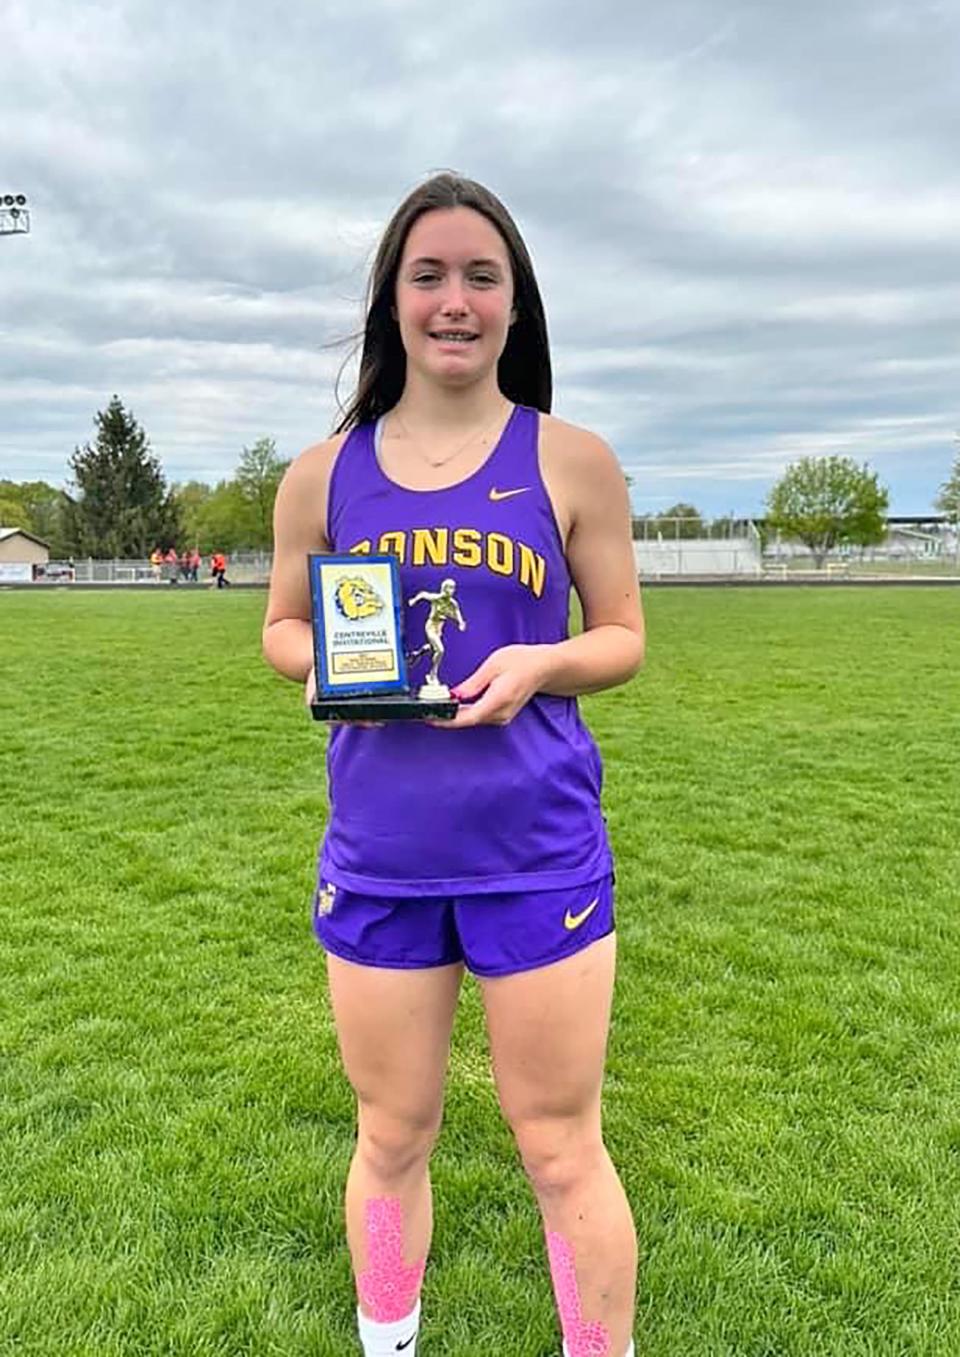 Bronson sophomore Jaiden Hayes was voted by opposing coaches as the Centreville Invite Most Outstanding Female Athlete for her work in the sprints and field events on Saturday.